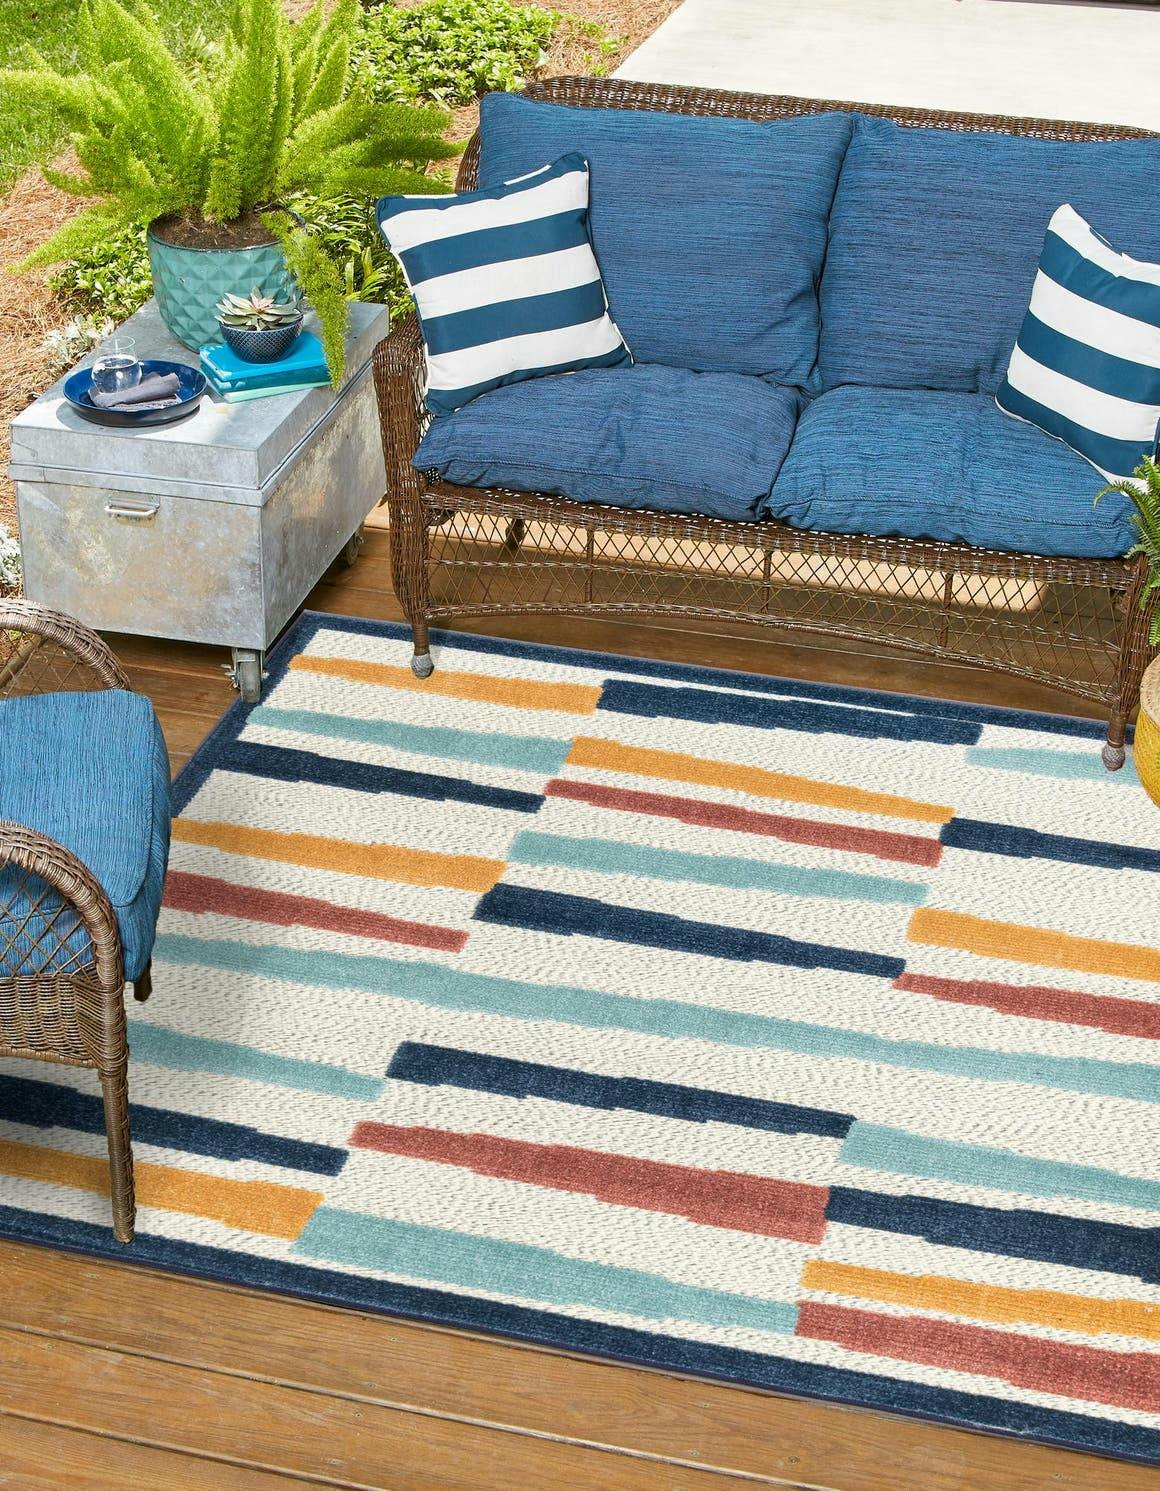 Belize Ivory Square Outdoor Rug with Geometric Patterns 5' 3"